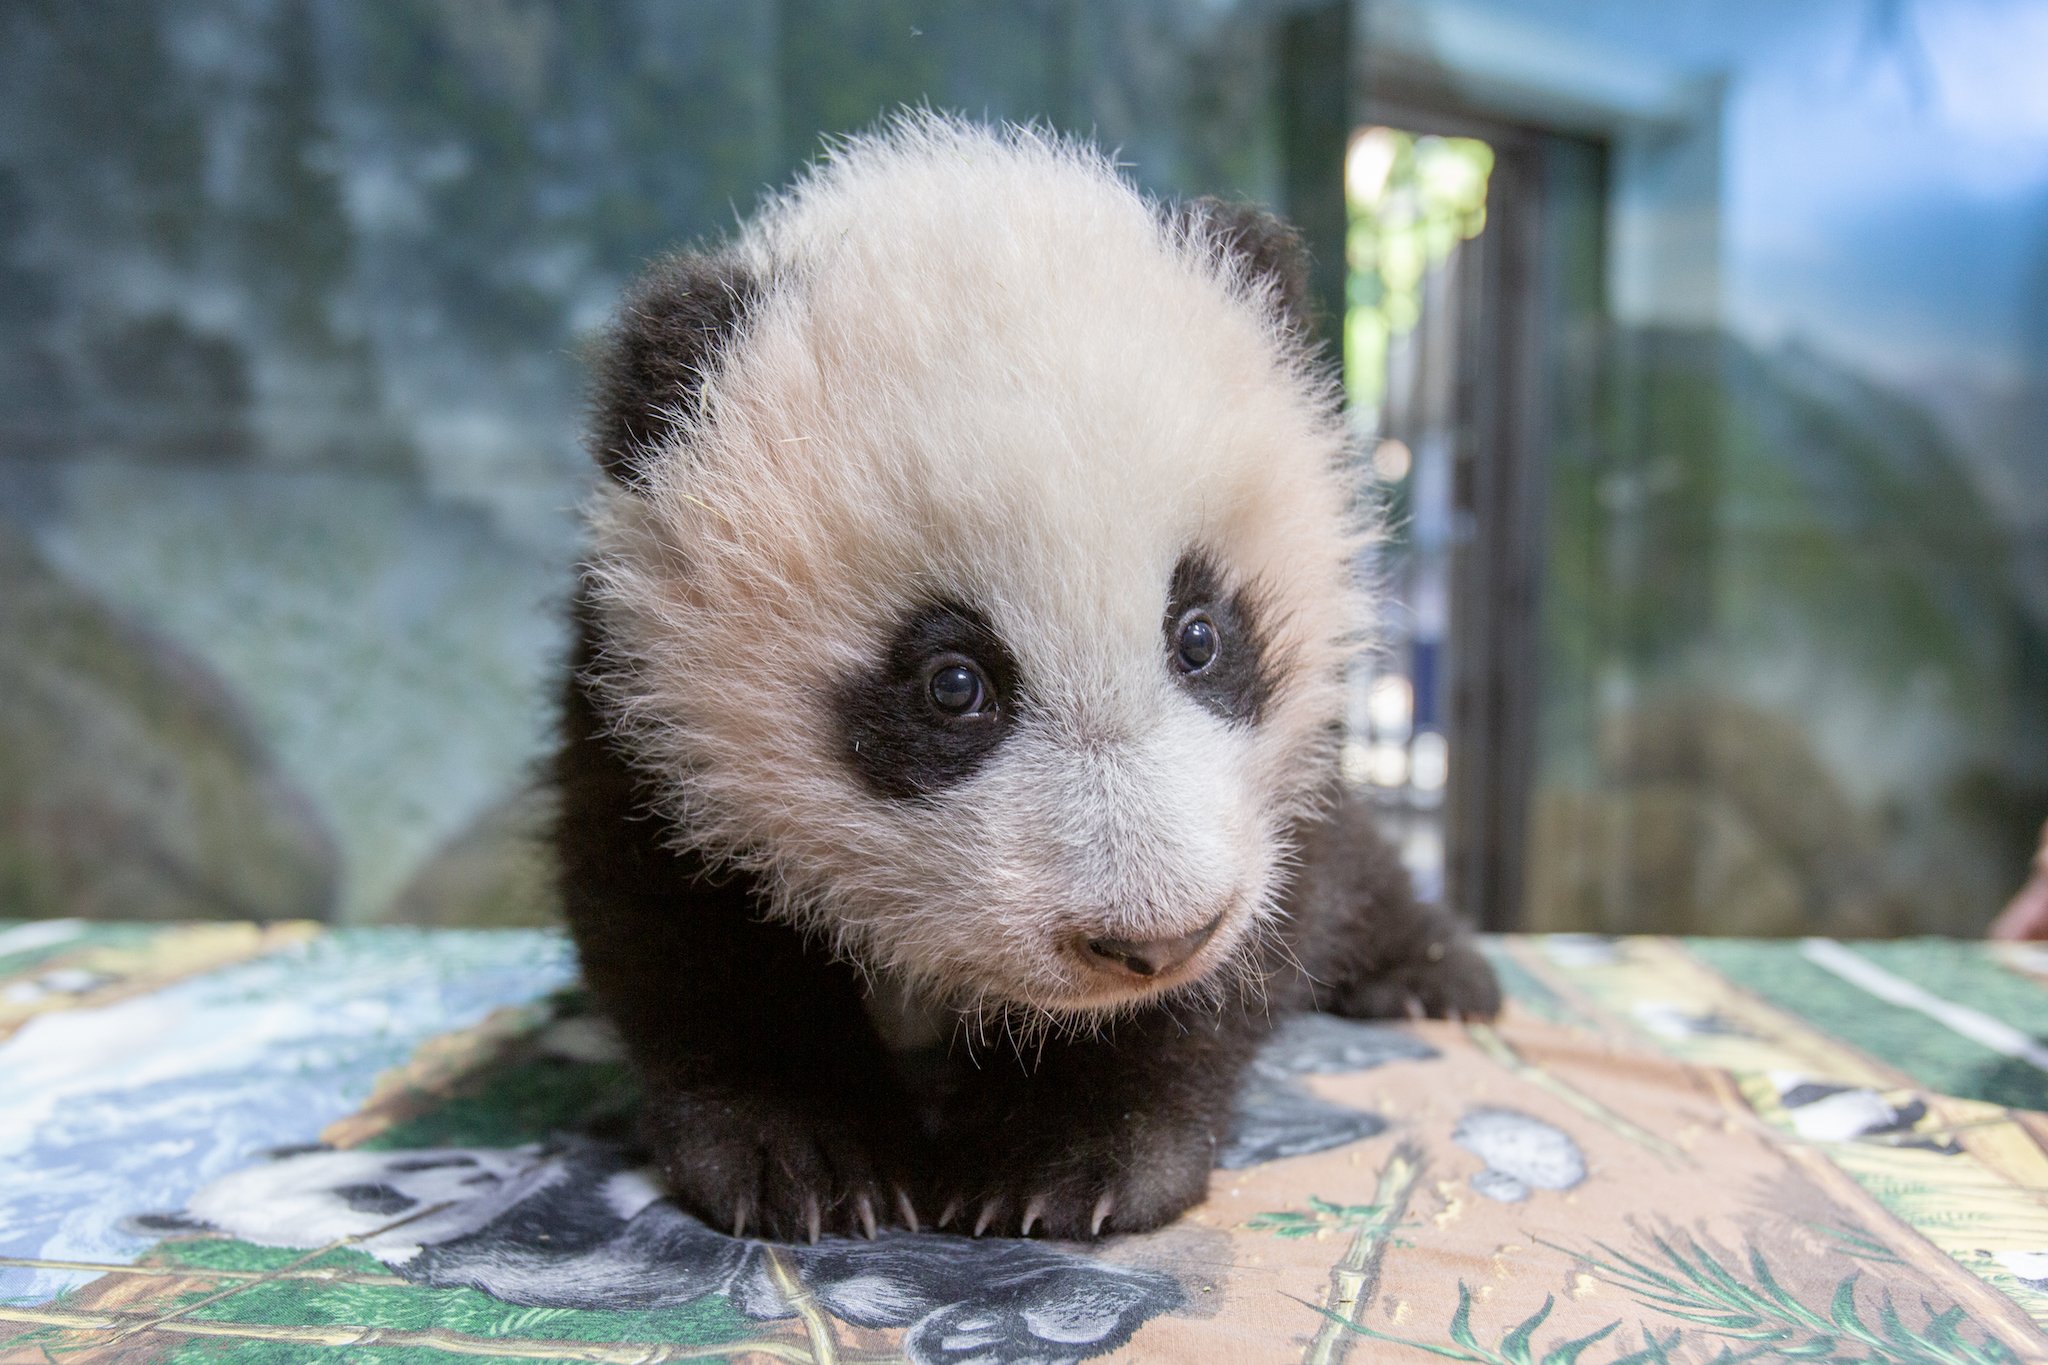 Photograph courtesy of Smithsonian's National Zoo.